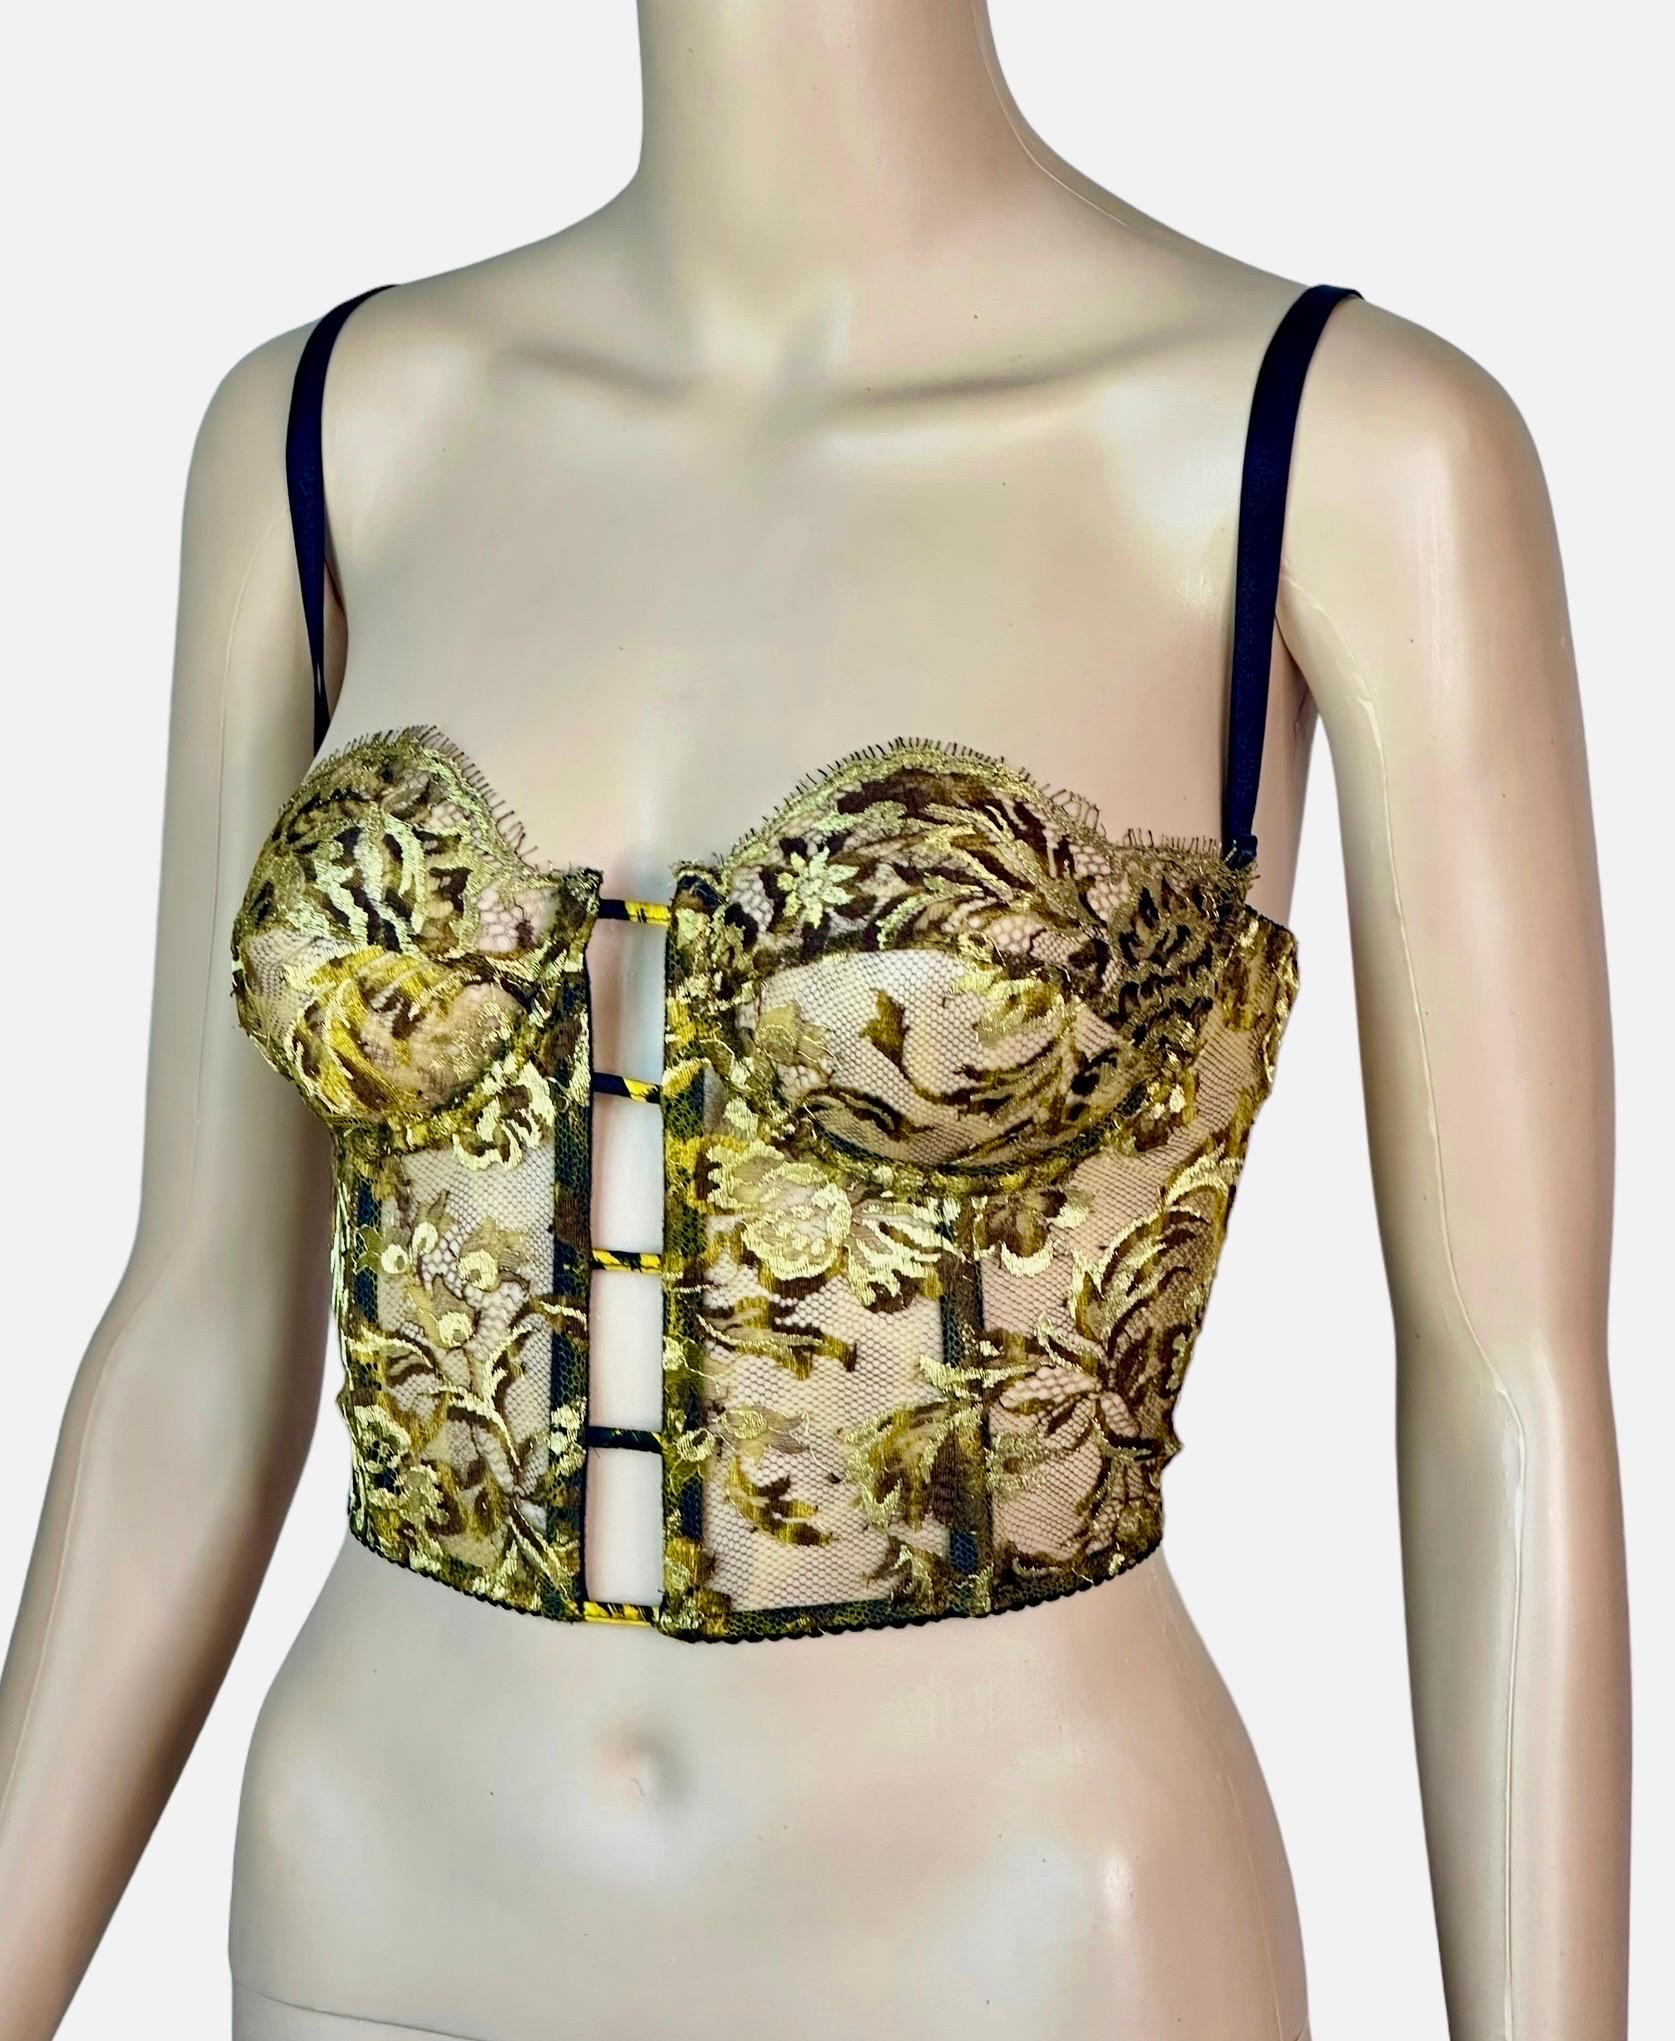 Gianni Versace S/S 1992 Unworn Sheer Gold Embroidered Lace Bustier Bra Crop Top  For Sale 3